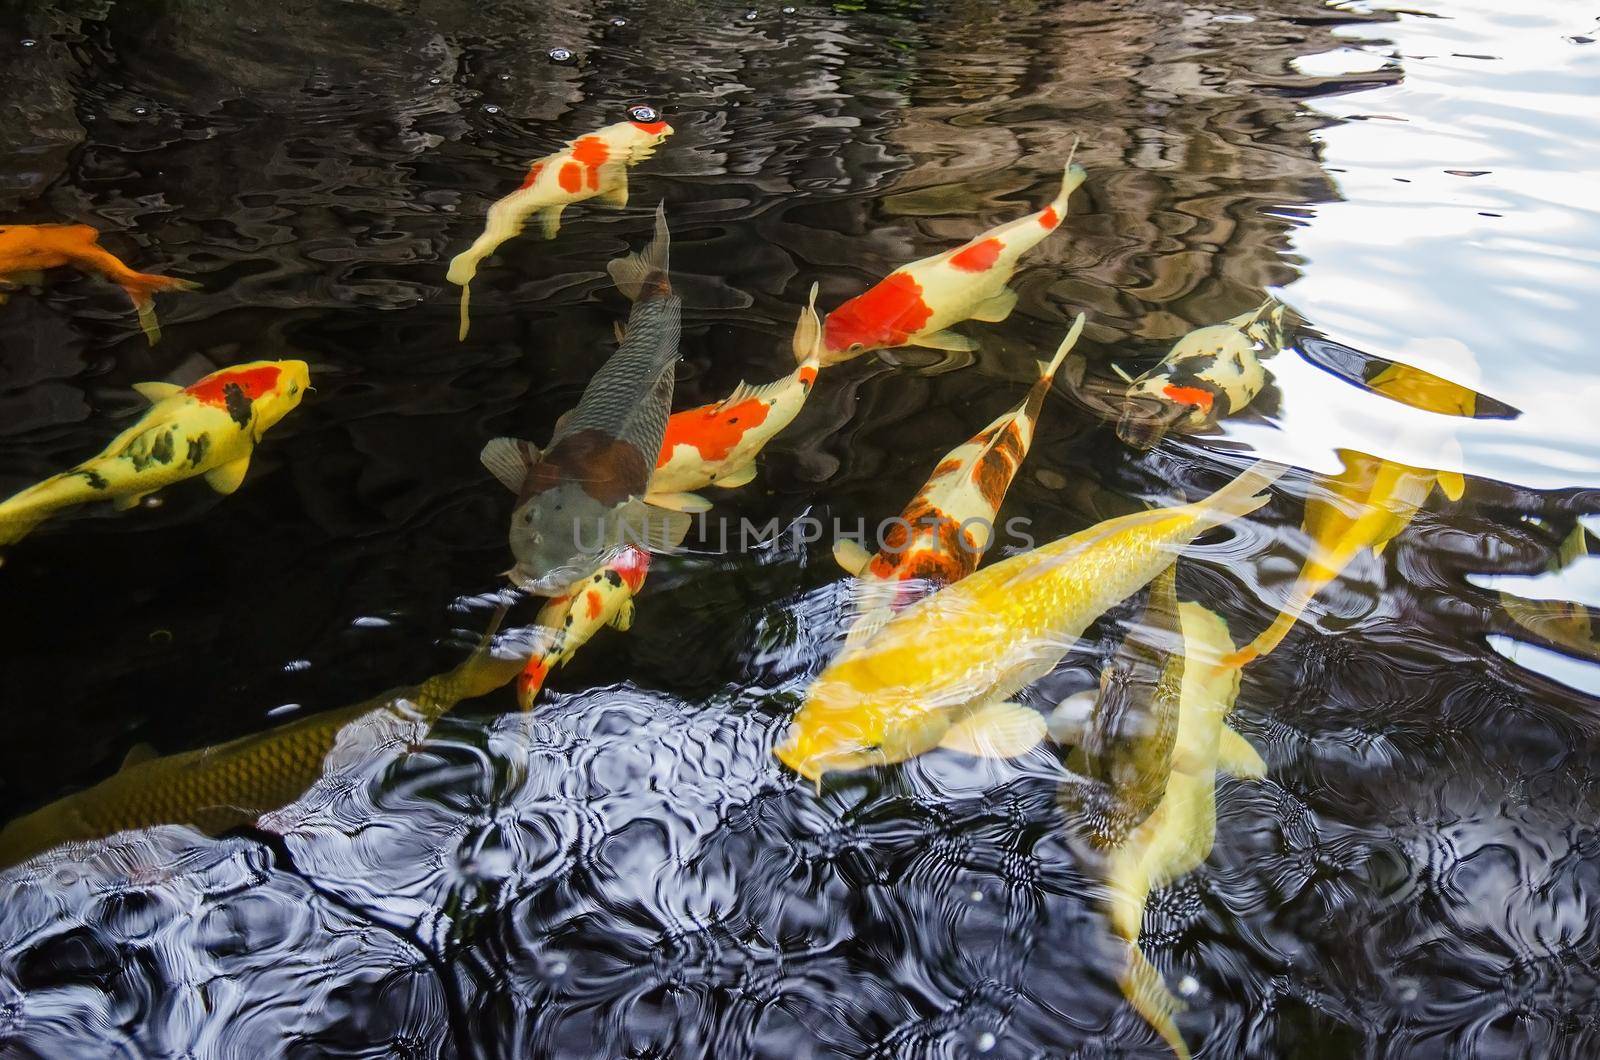 Goldfish swim in a pond. Many colored Koi carp from the island of Bali. Stock image.